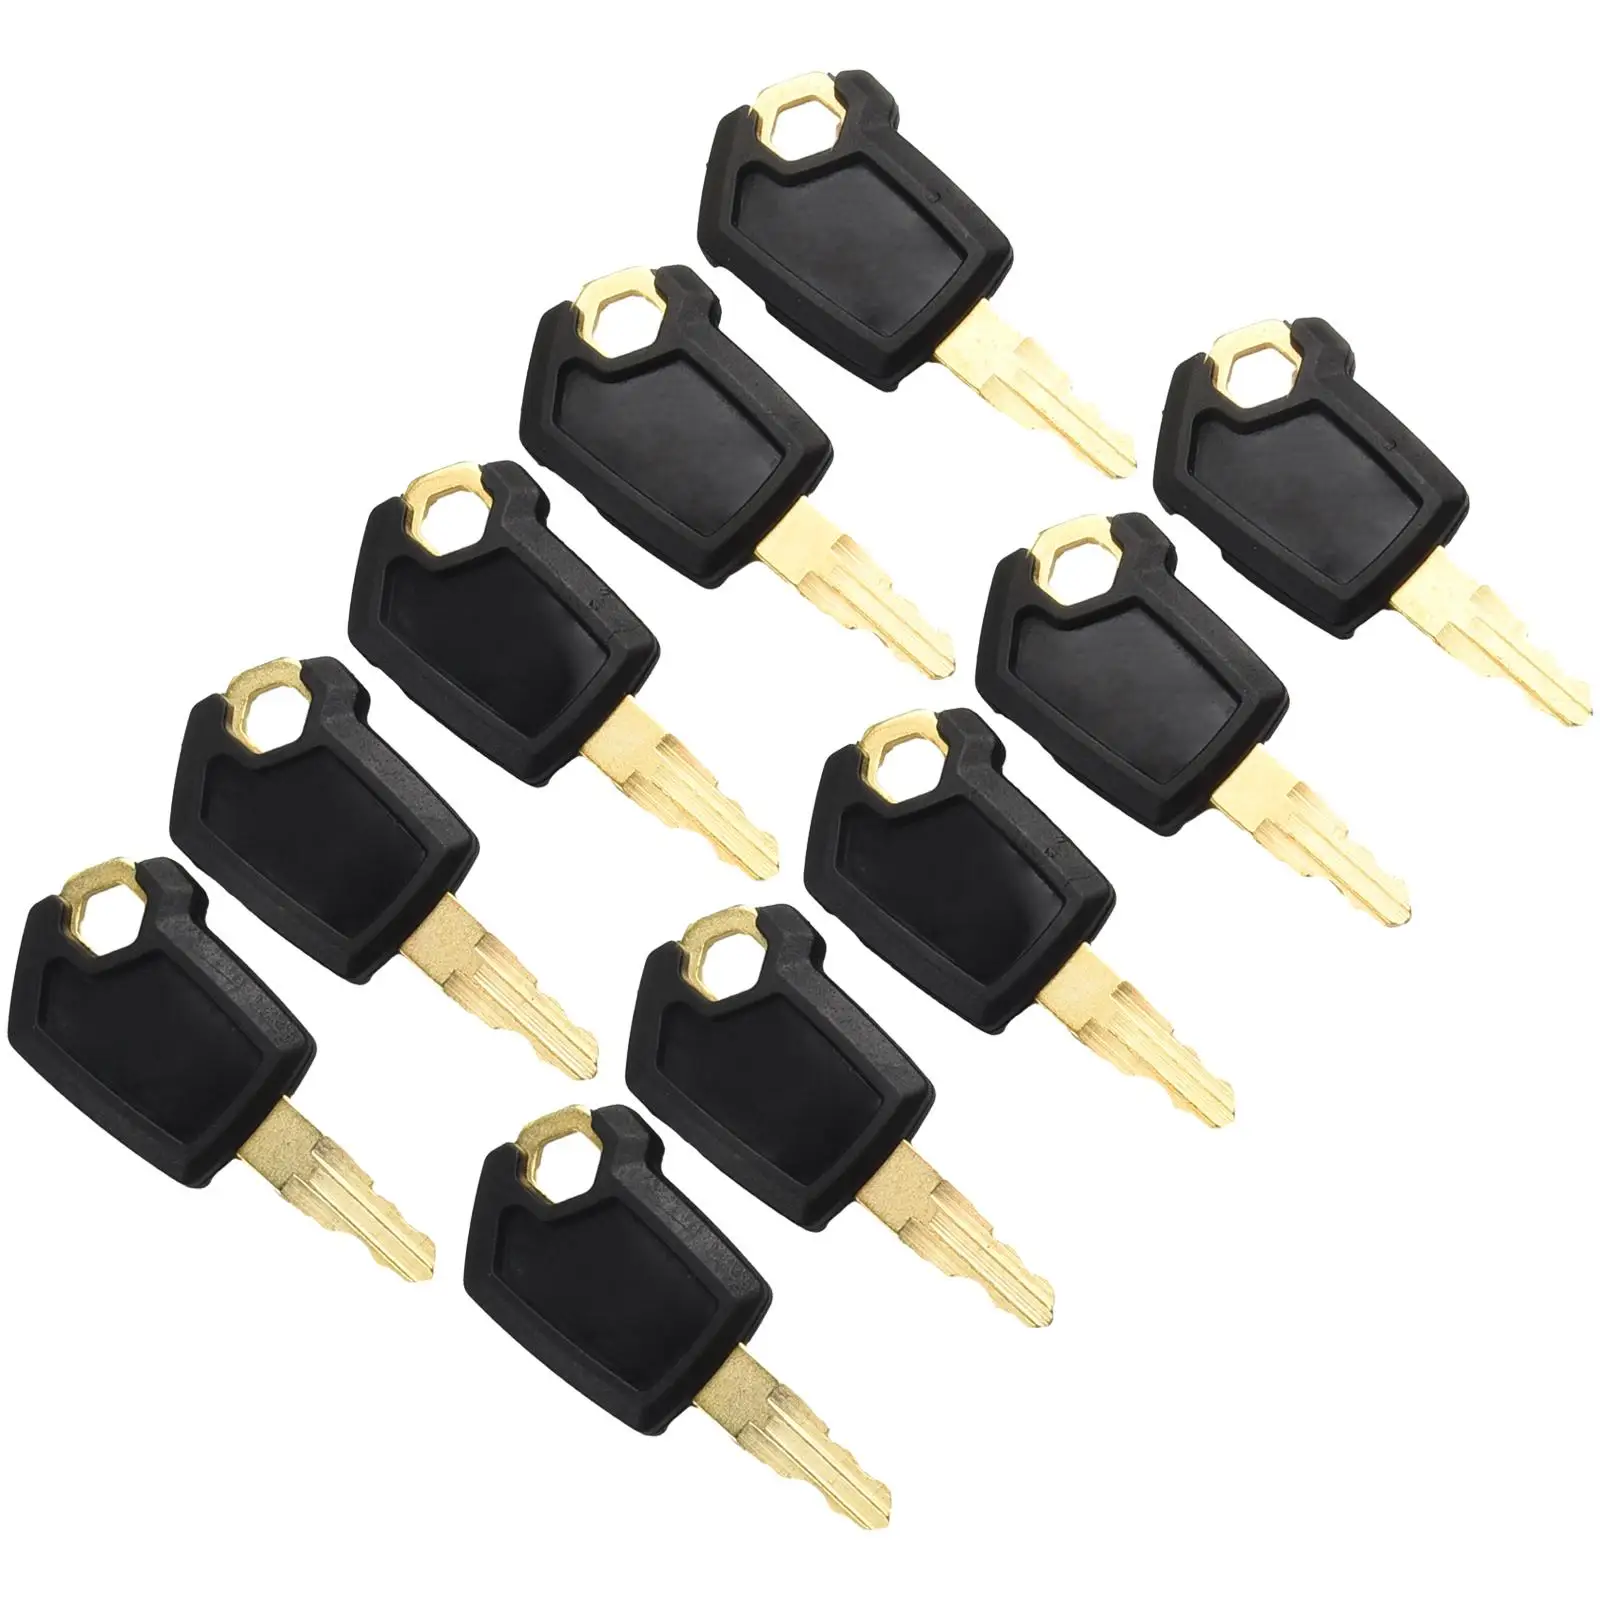 

Reliable Ignition Key 5P8500 for CAT Loaders 10 Pack Perfect Fit Complete Package with Multiple Spare/Replacement Keys